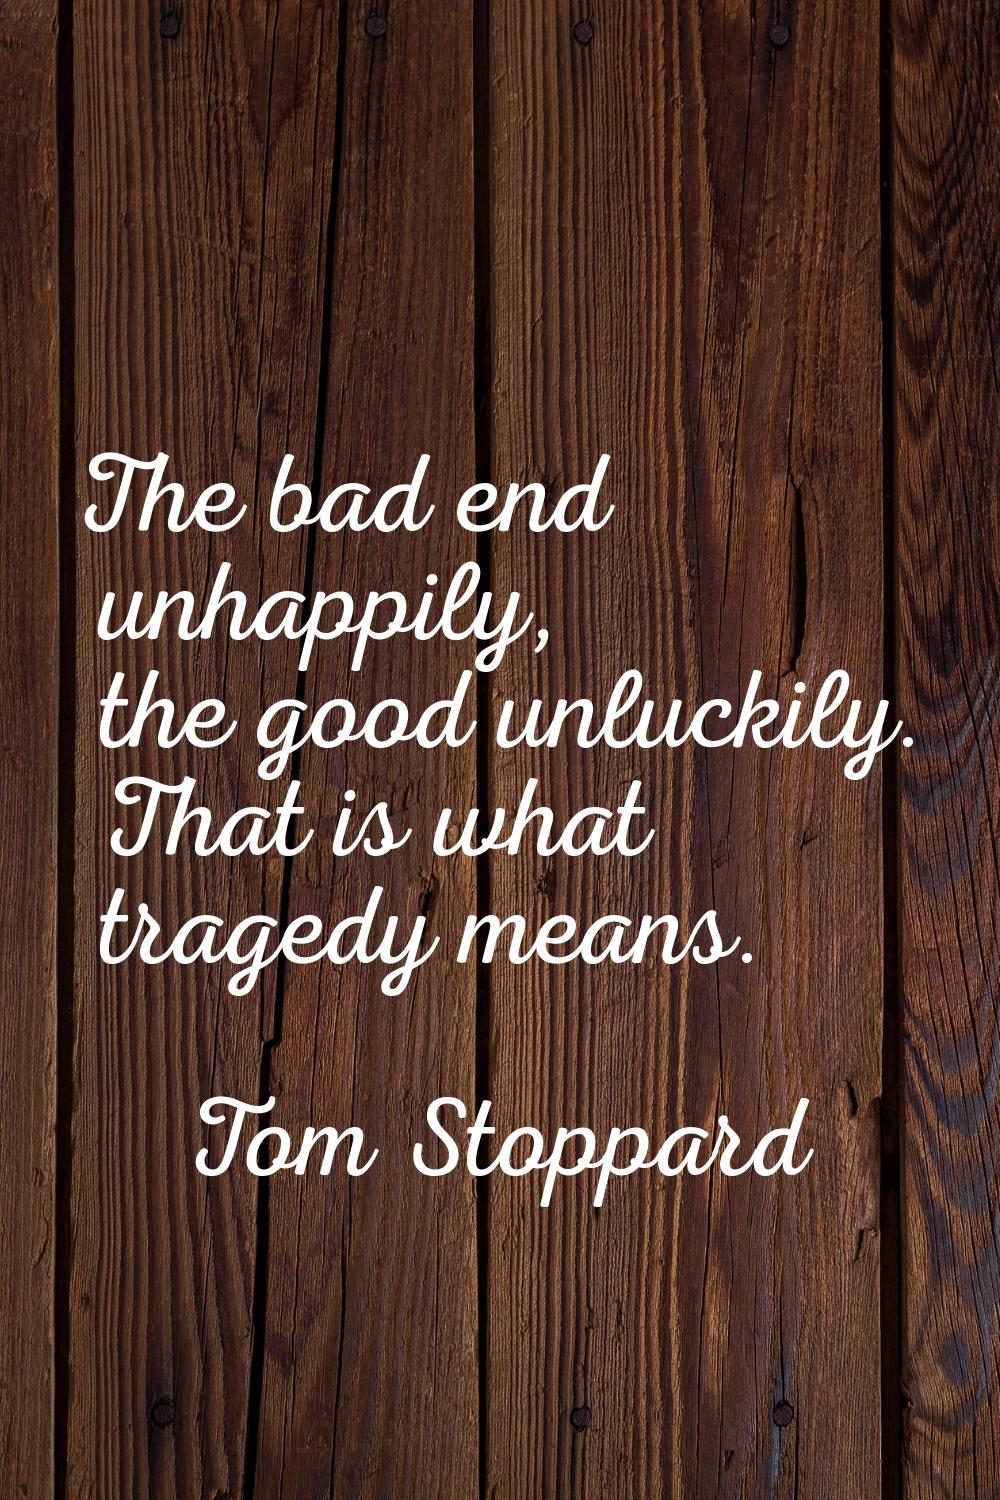 The bad end unhappily, the good unluckily. That is what tragedy means.